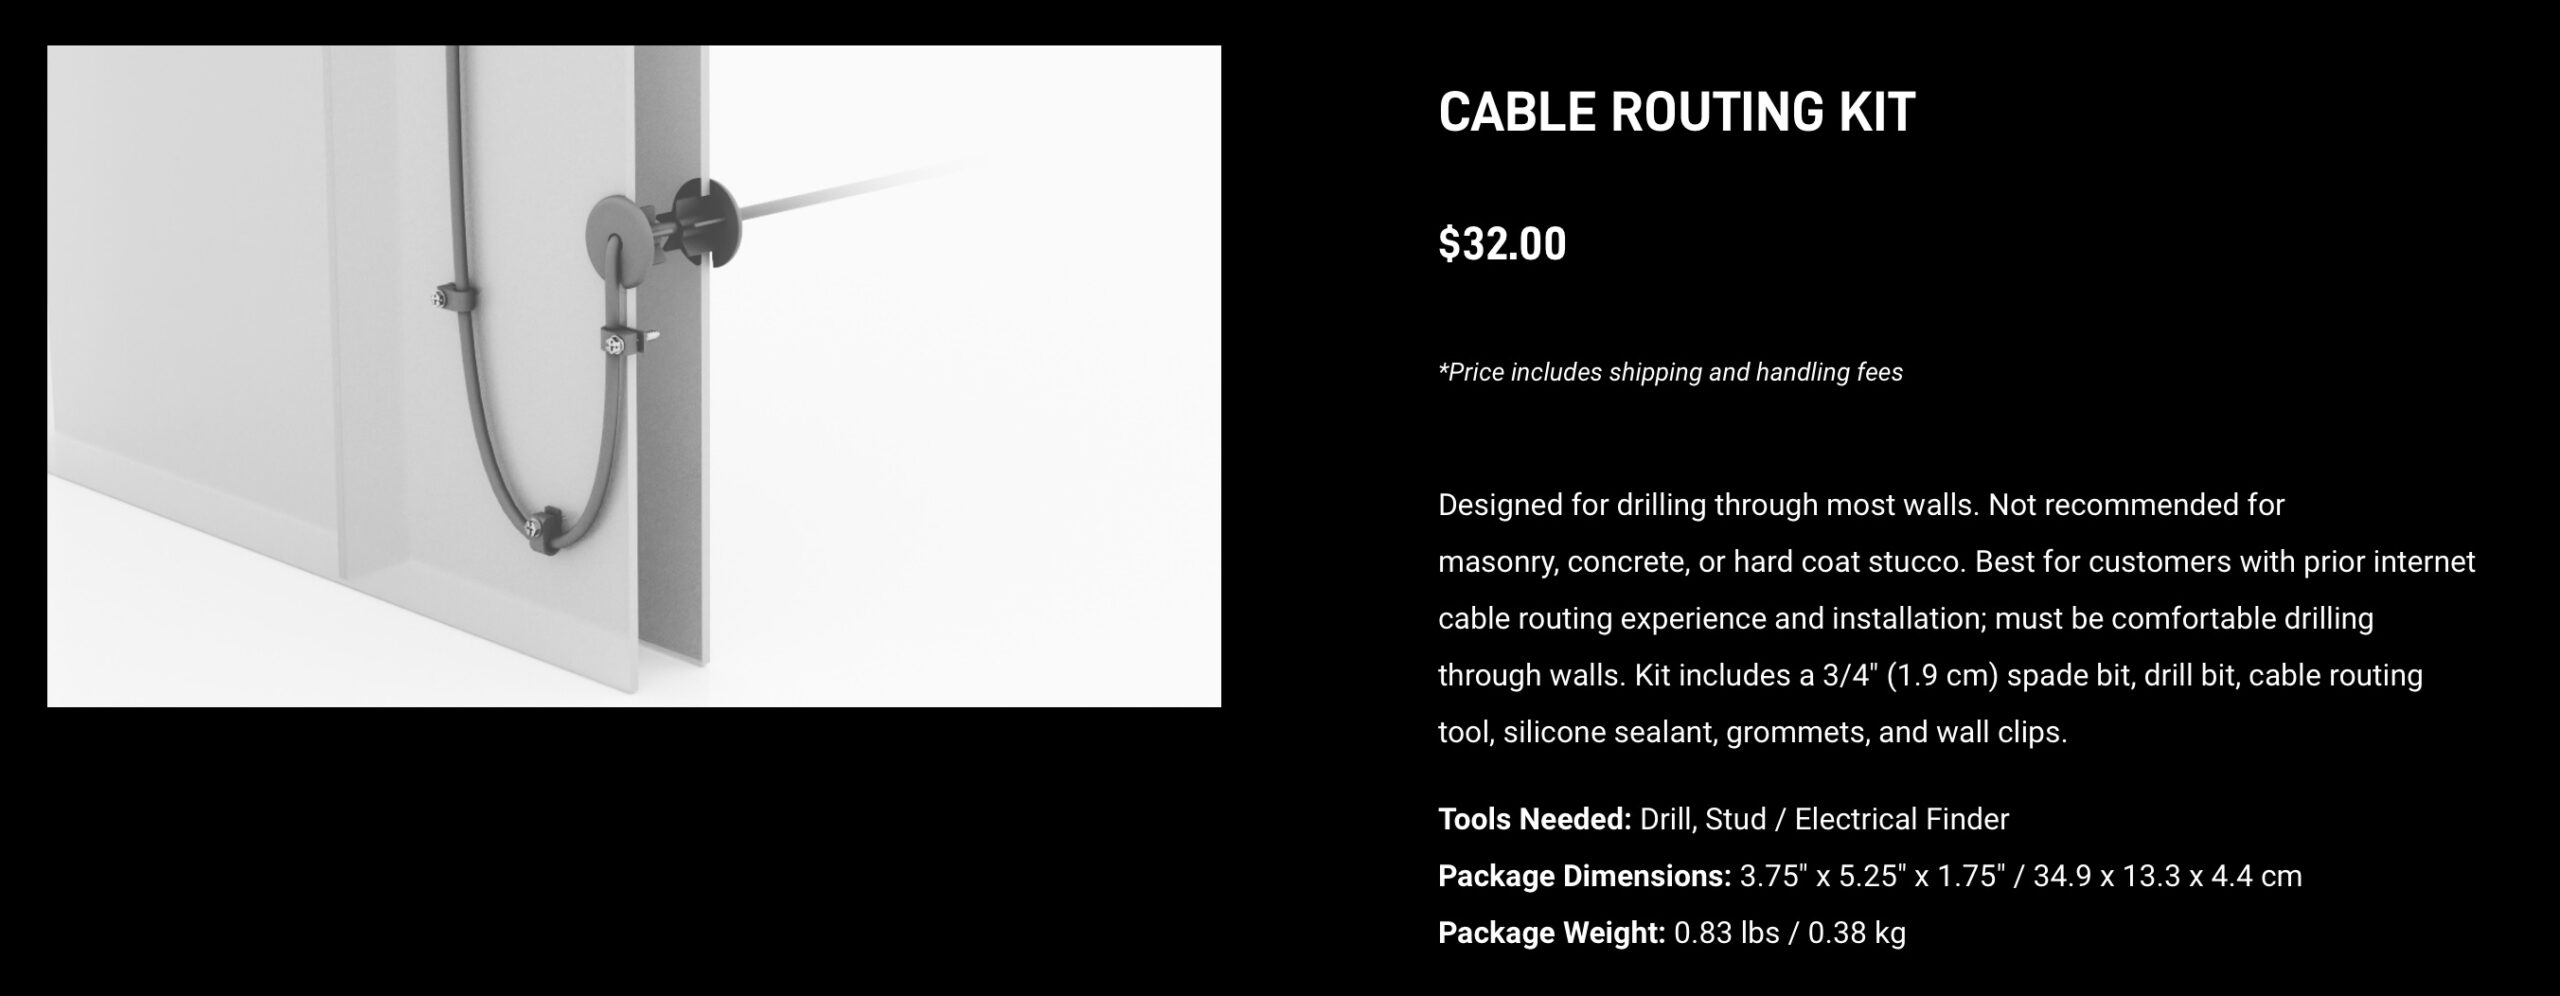 Starlink Cable Routing Kit product page